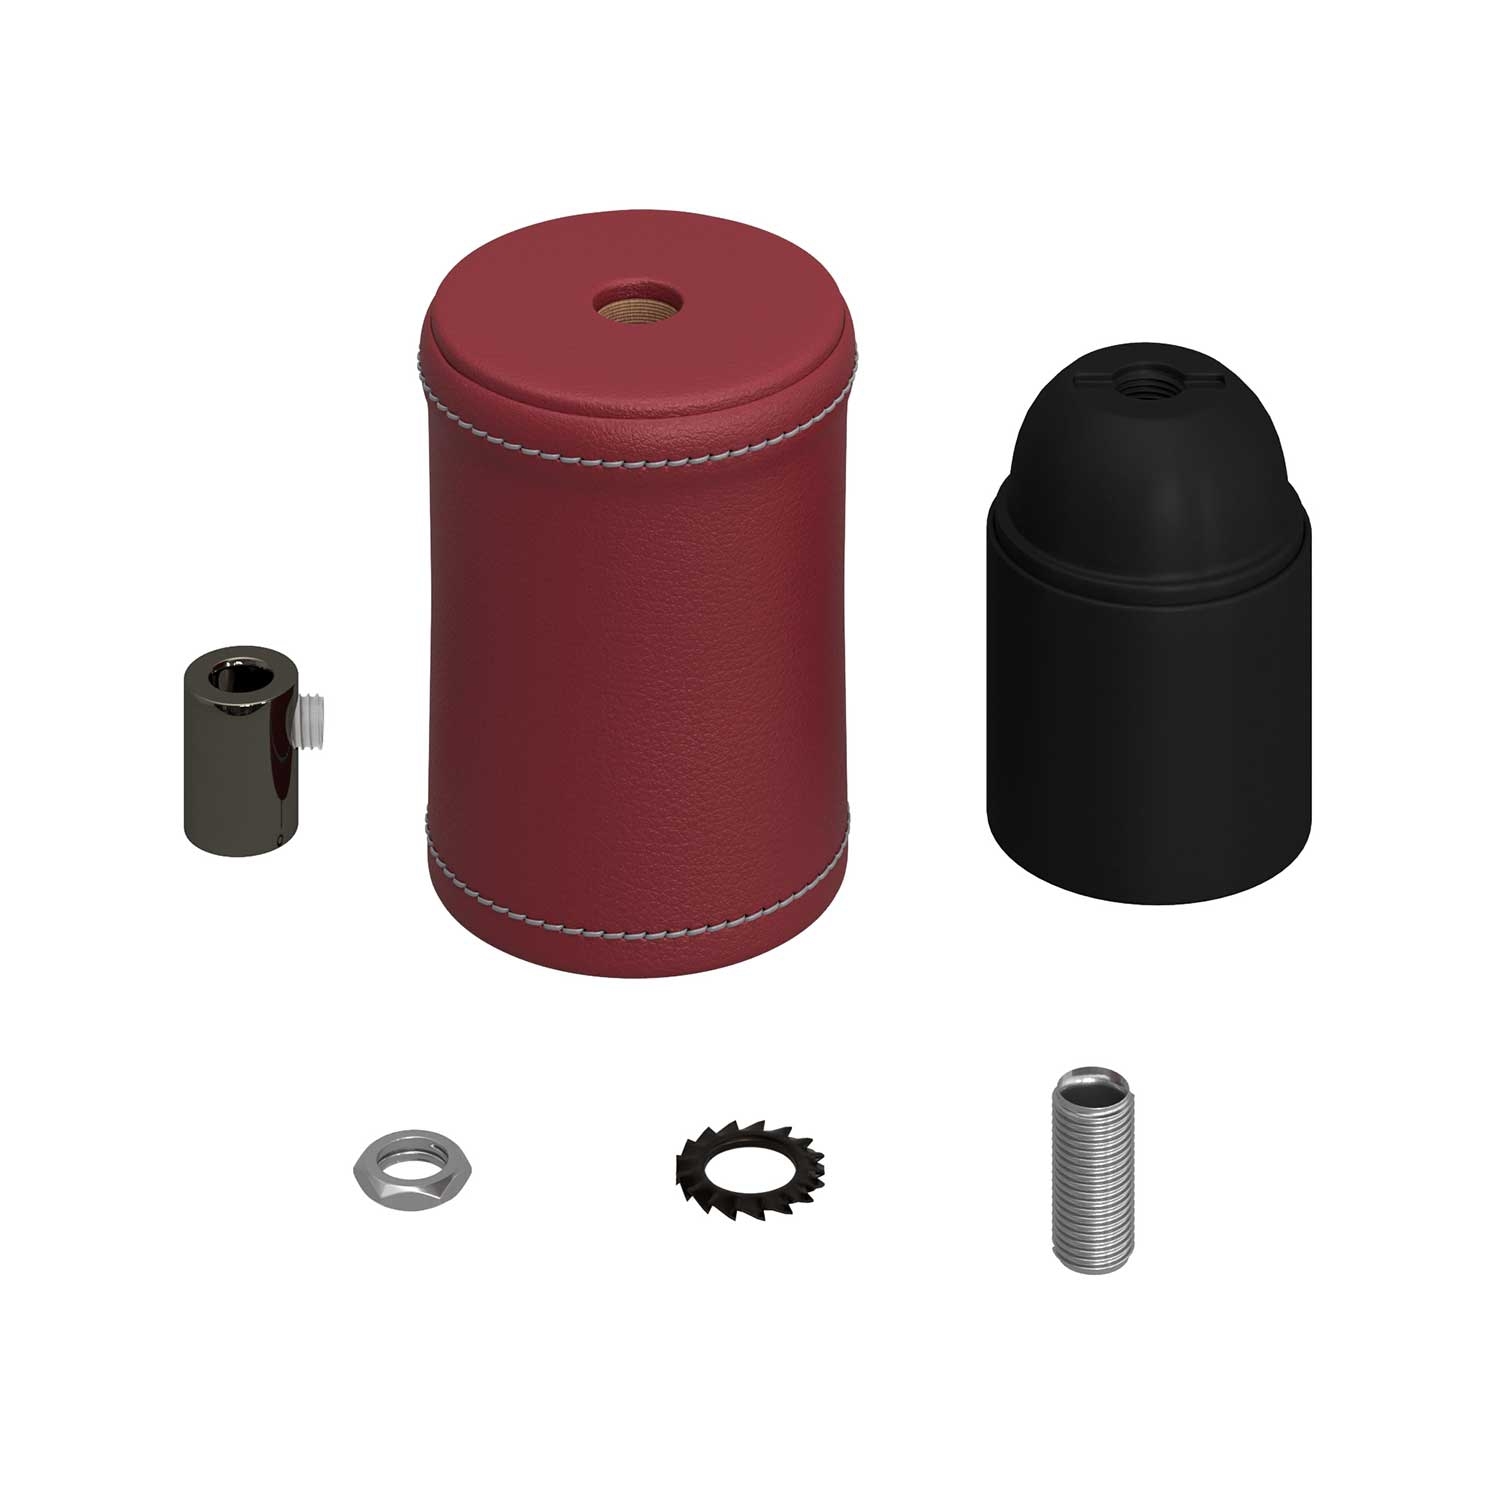 Leather covered wooden UL E26 socket kit